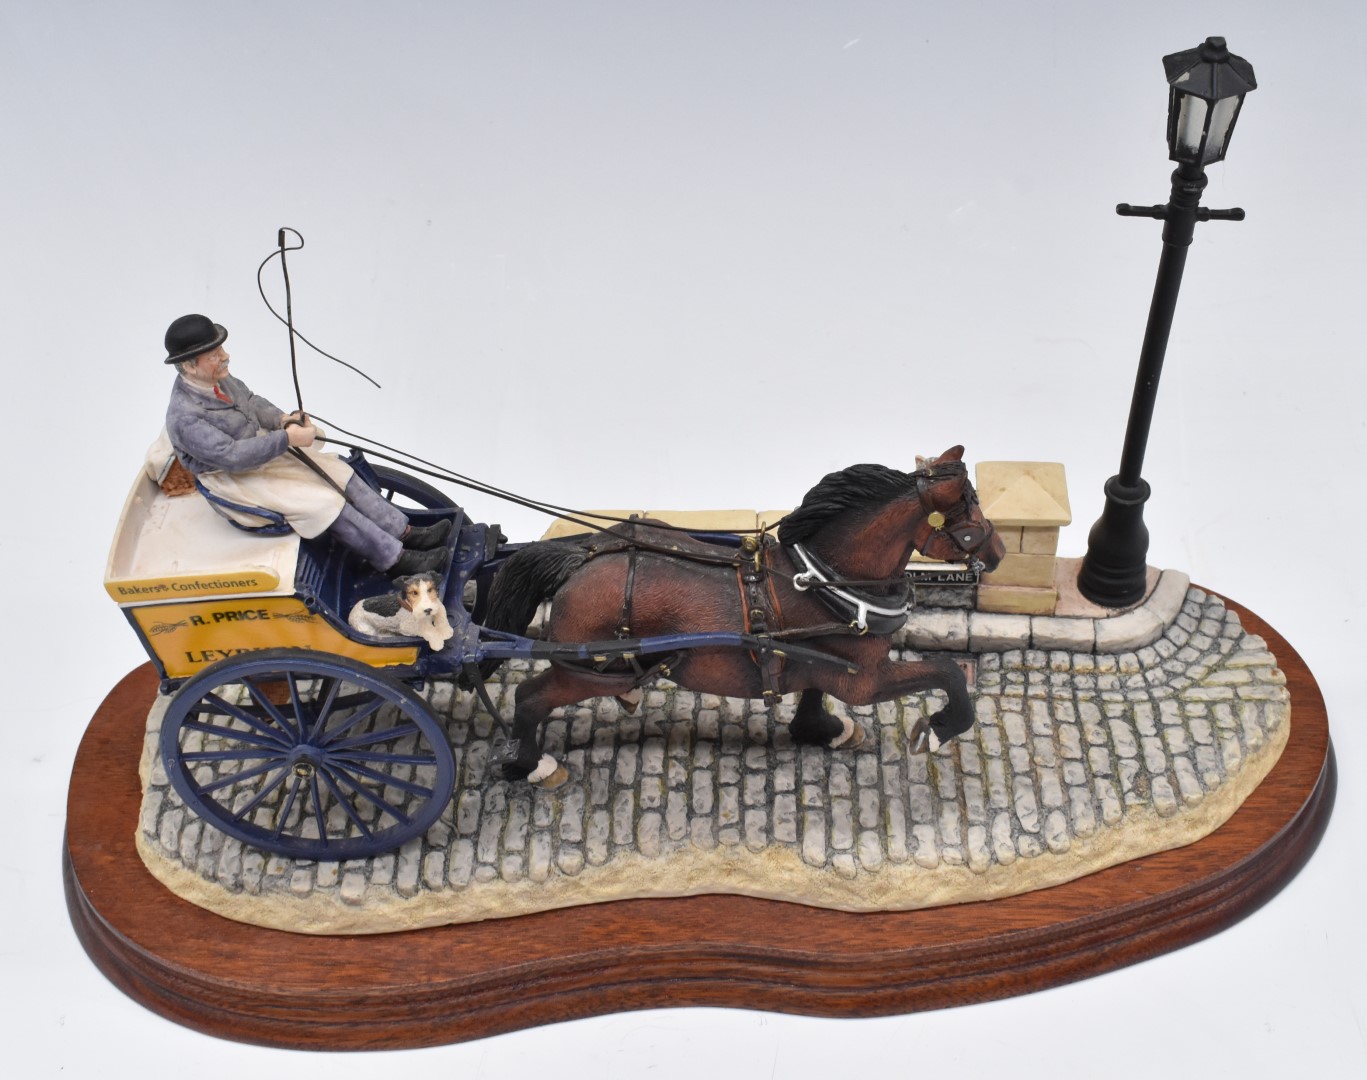 Border Fine Arts limited edition 259/1500 'R Price, Leyburn, Bakers and Confectioners' pony and trap - Image 2 of 5